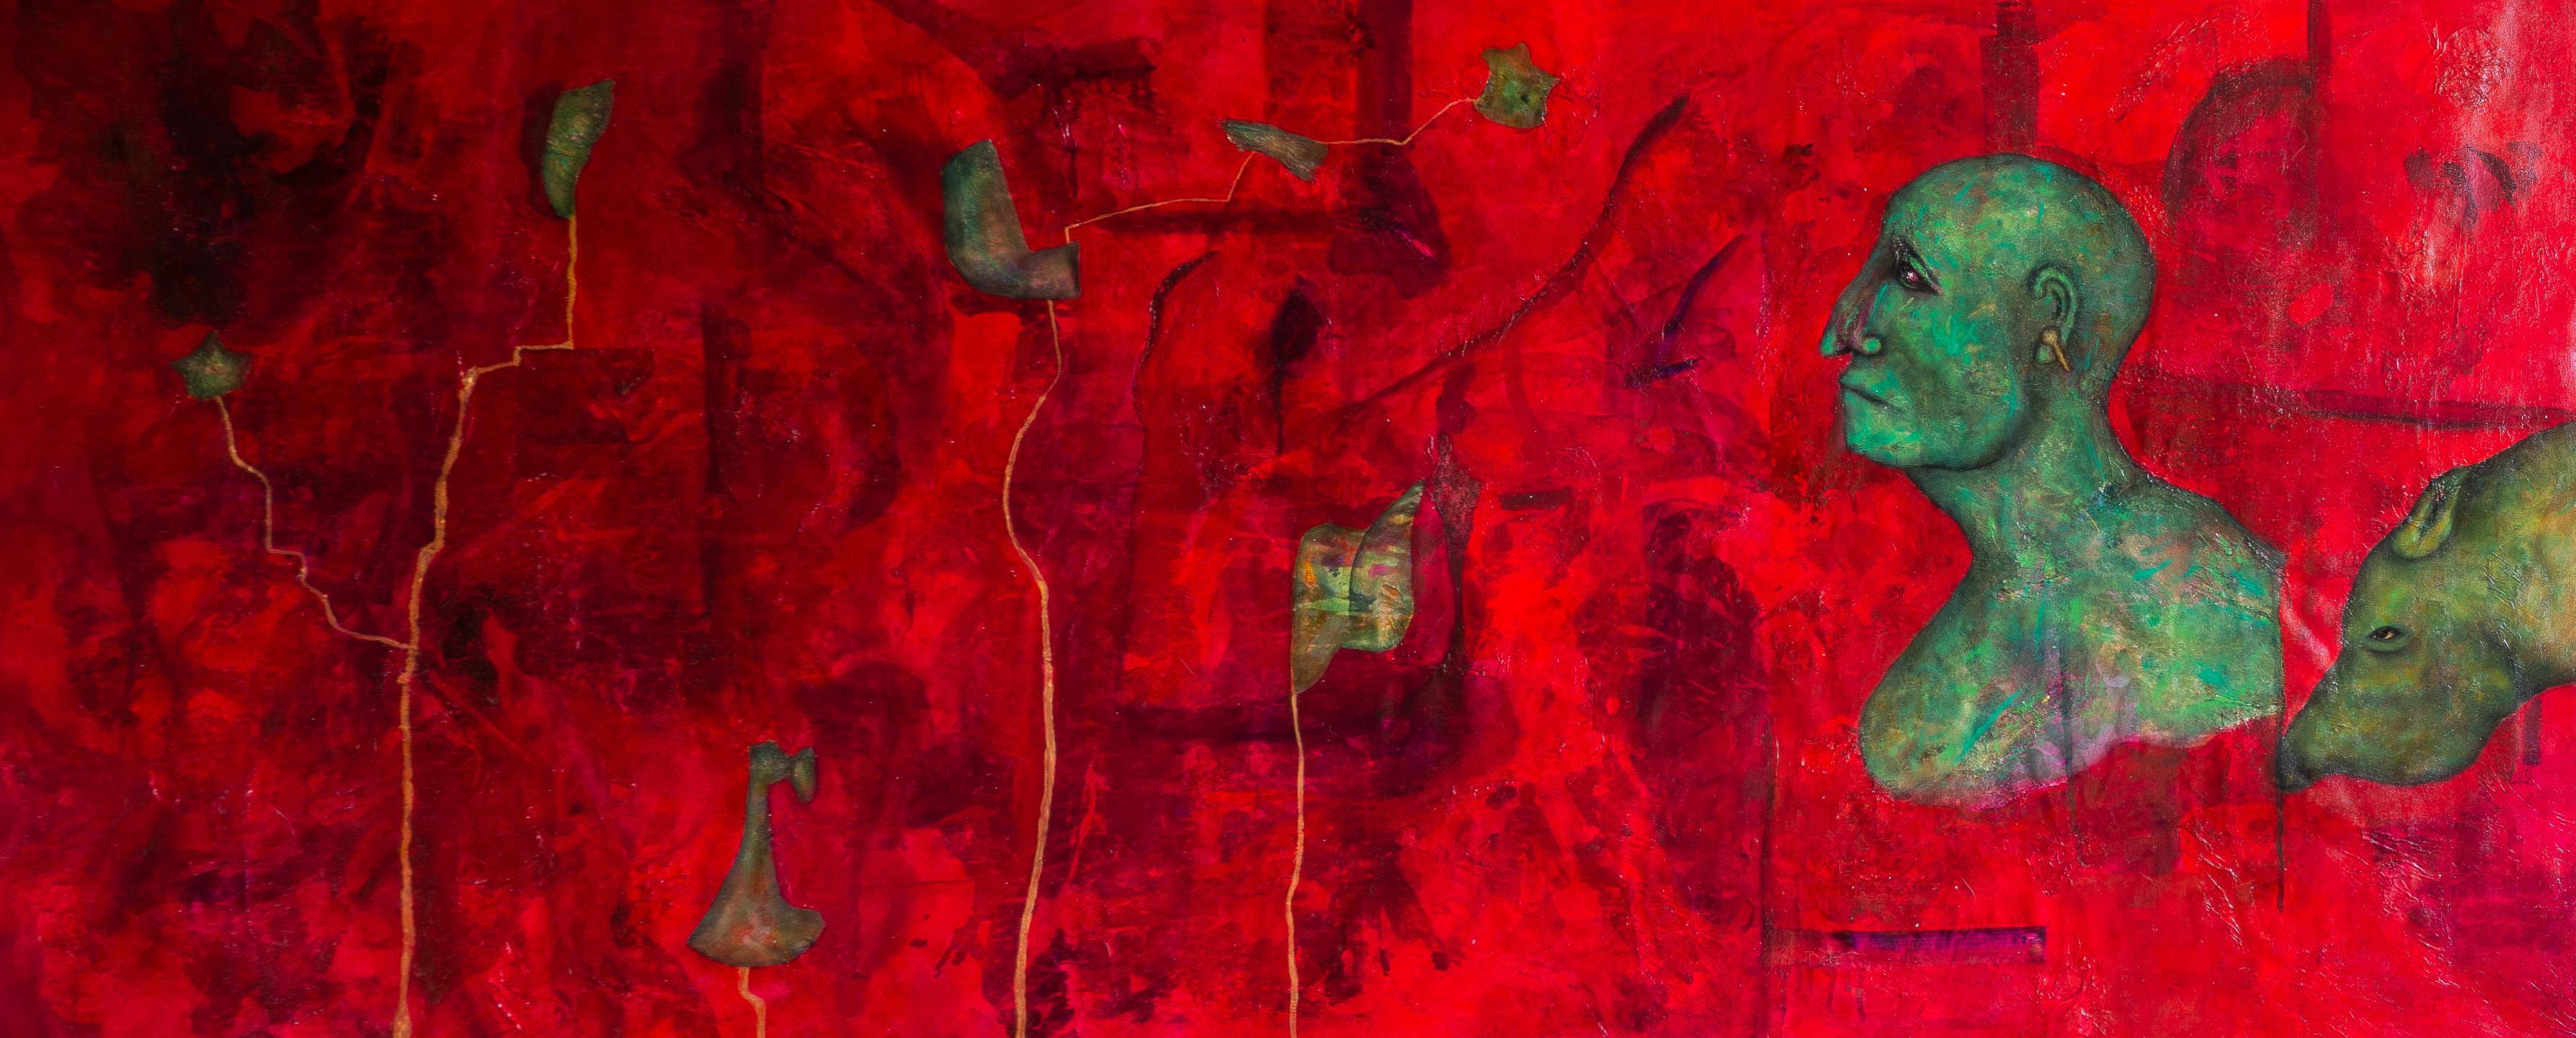 Luis Alexander Rodríguez (Ie-Xiua) Interior Painting - ABSTRACT Painting With Magical Red Tones “Red Rhapsody”, Mixed Technique, 2022